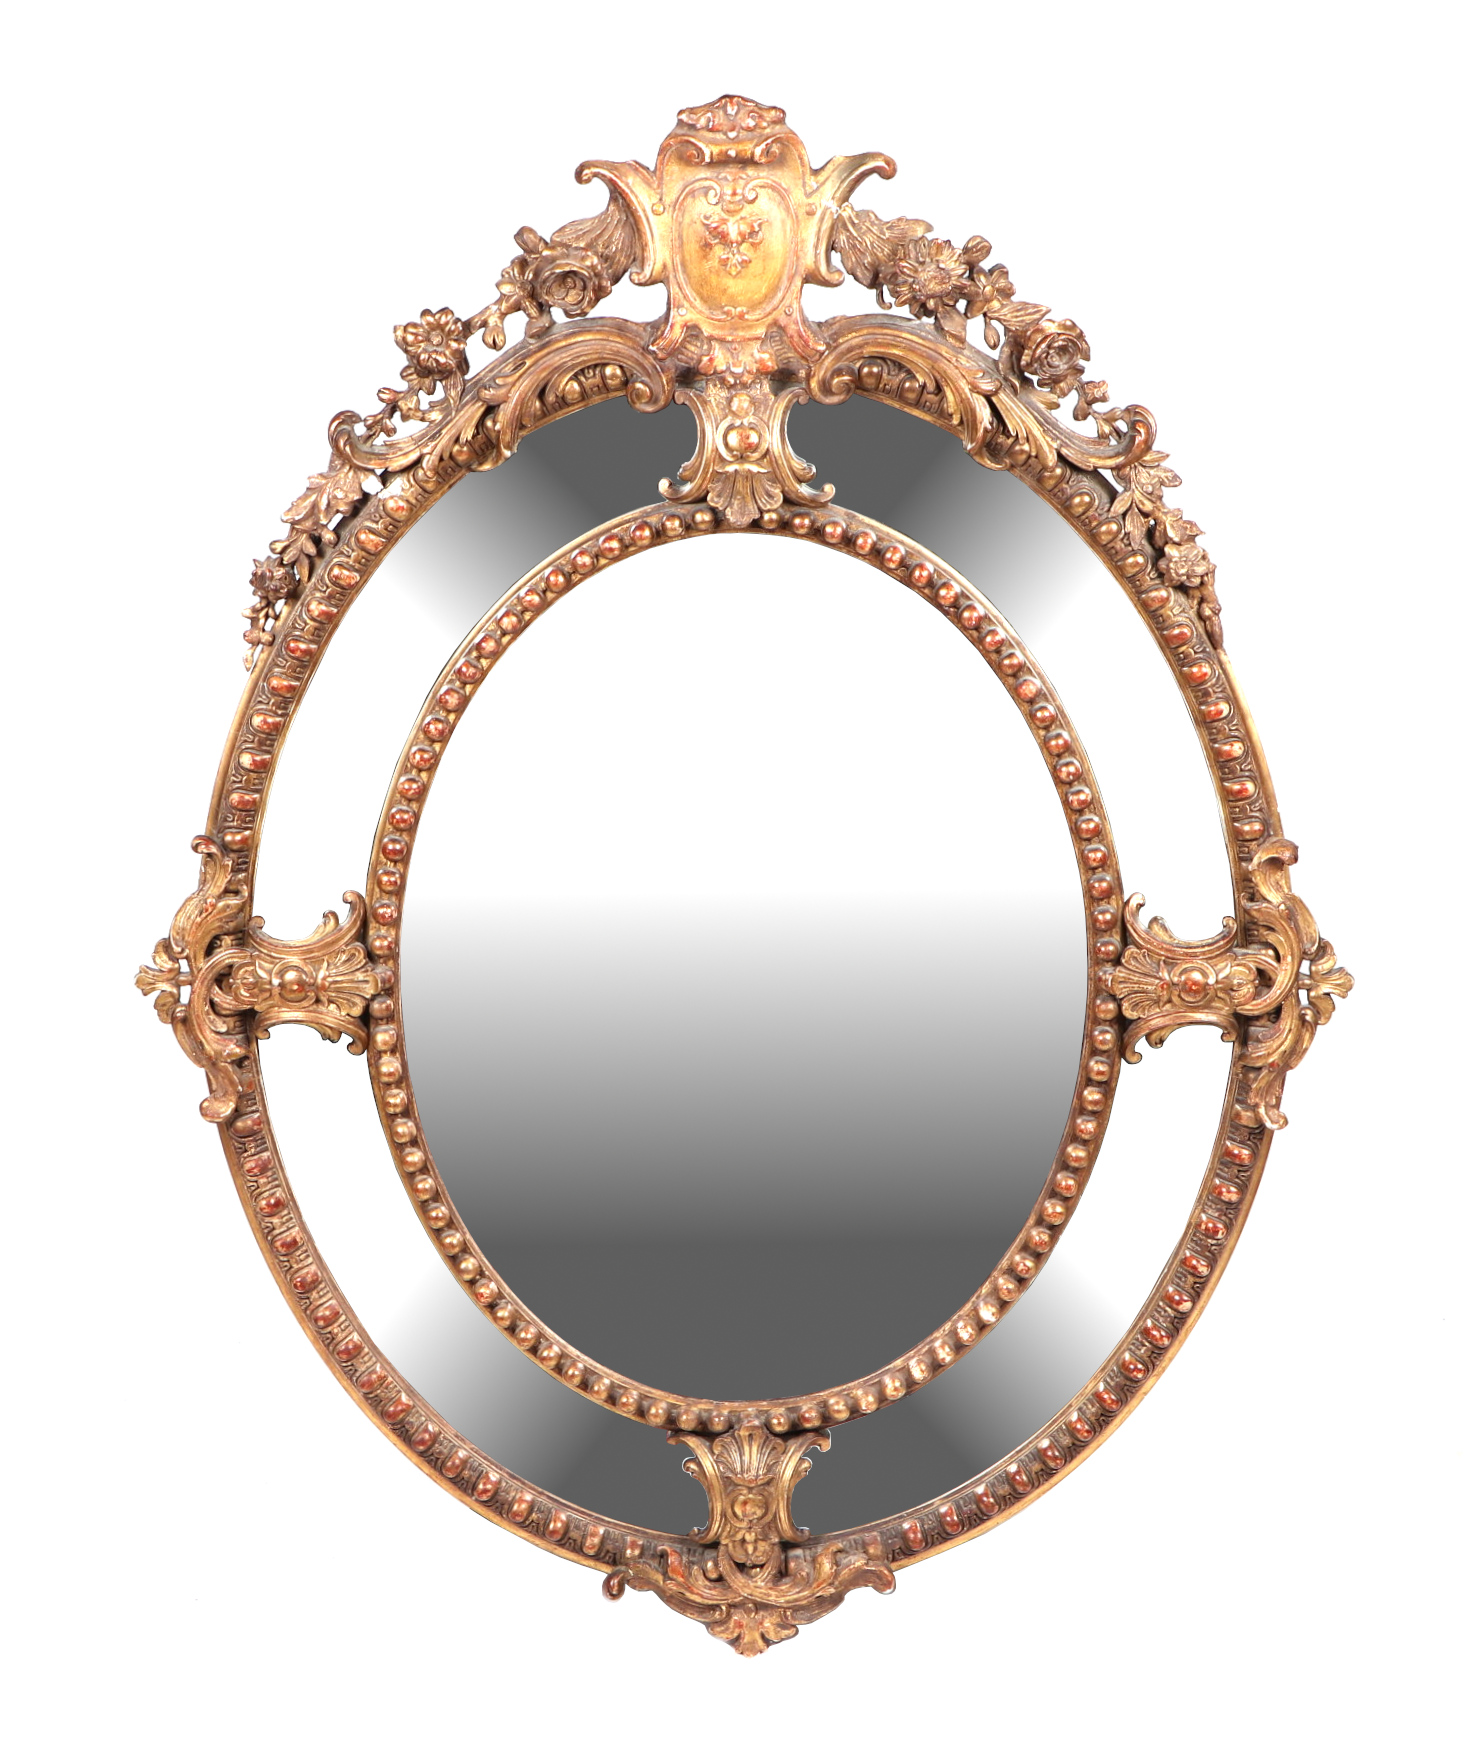 A 19th century carved giltwood and gesso oval wall mirror decorated with fleur de lys and swags